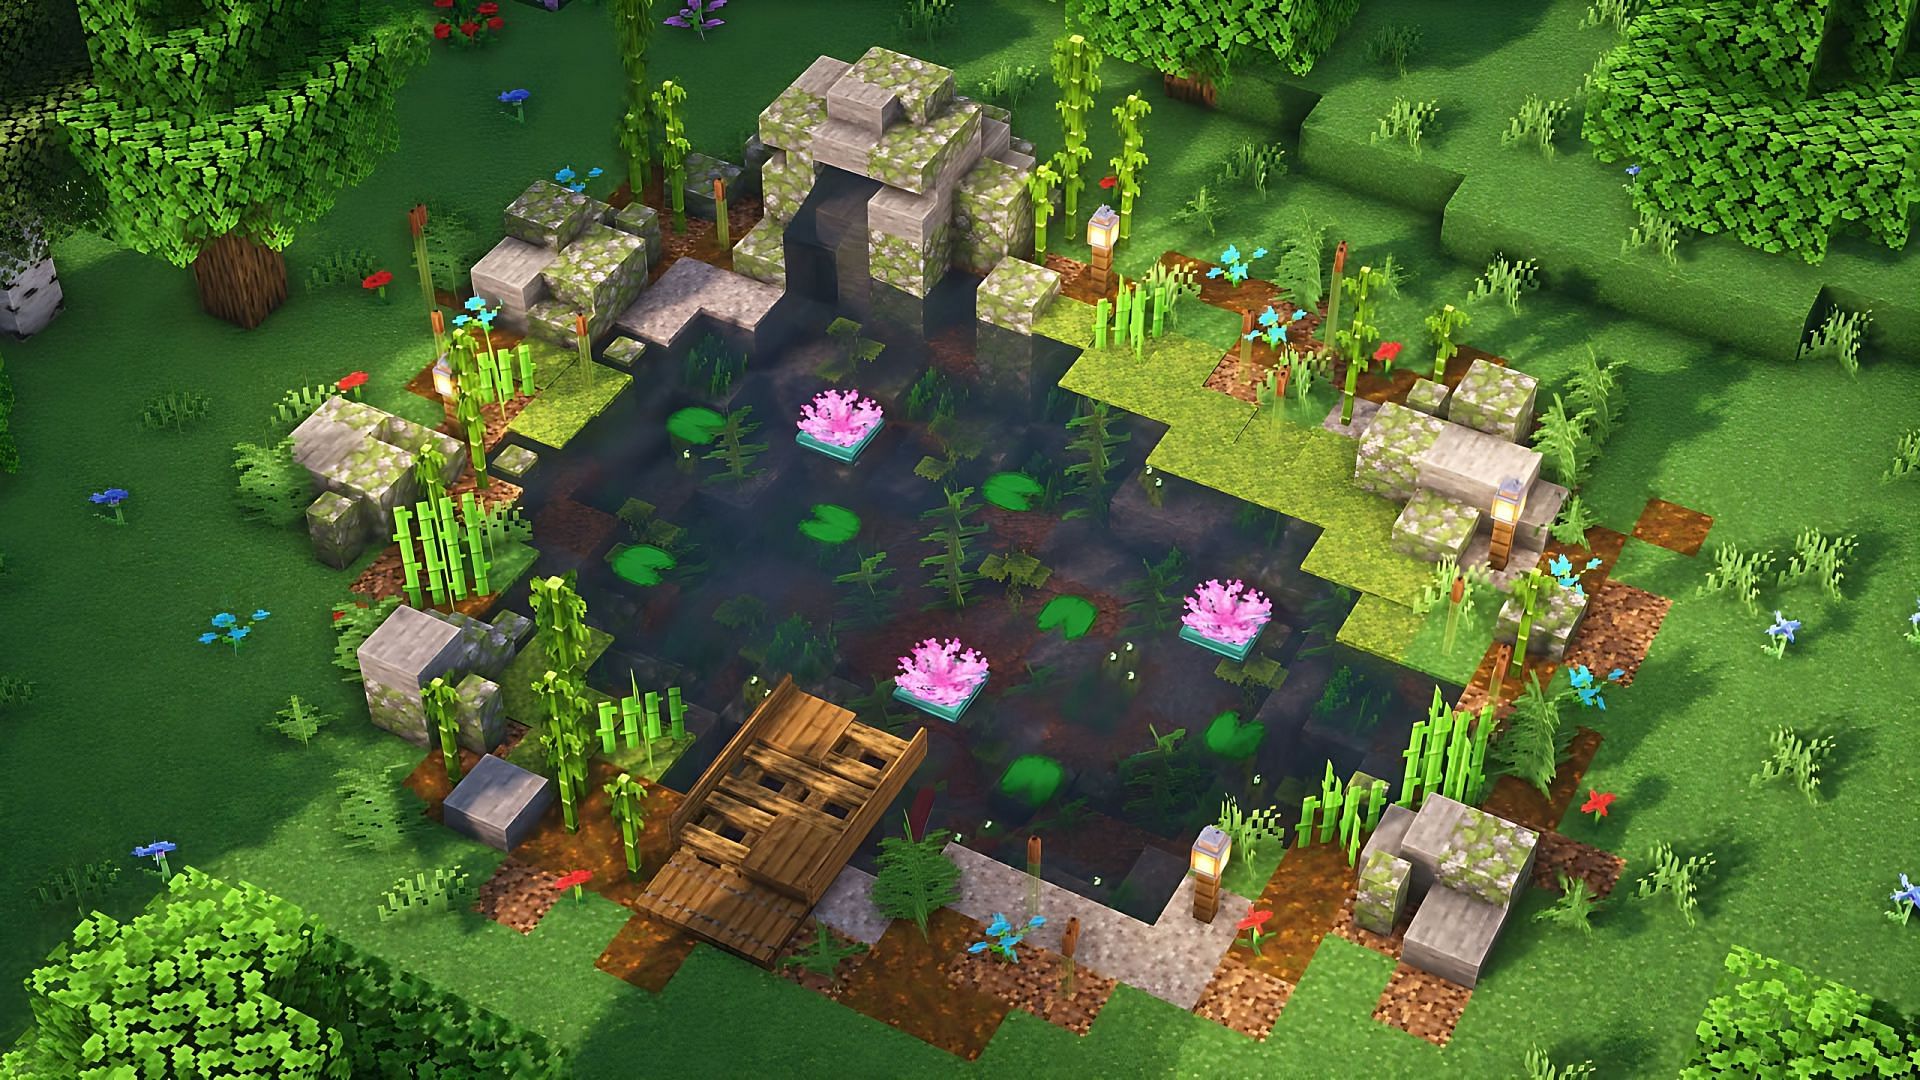 Ponds are easy Minecraft builds (Image via Youtube/Goldrobin)